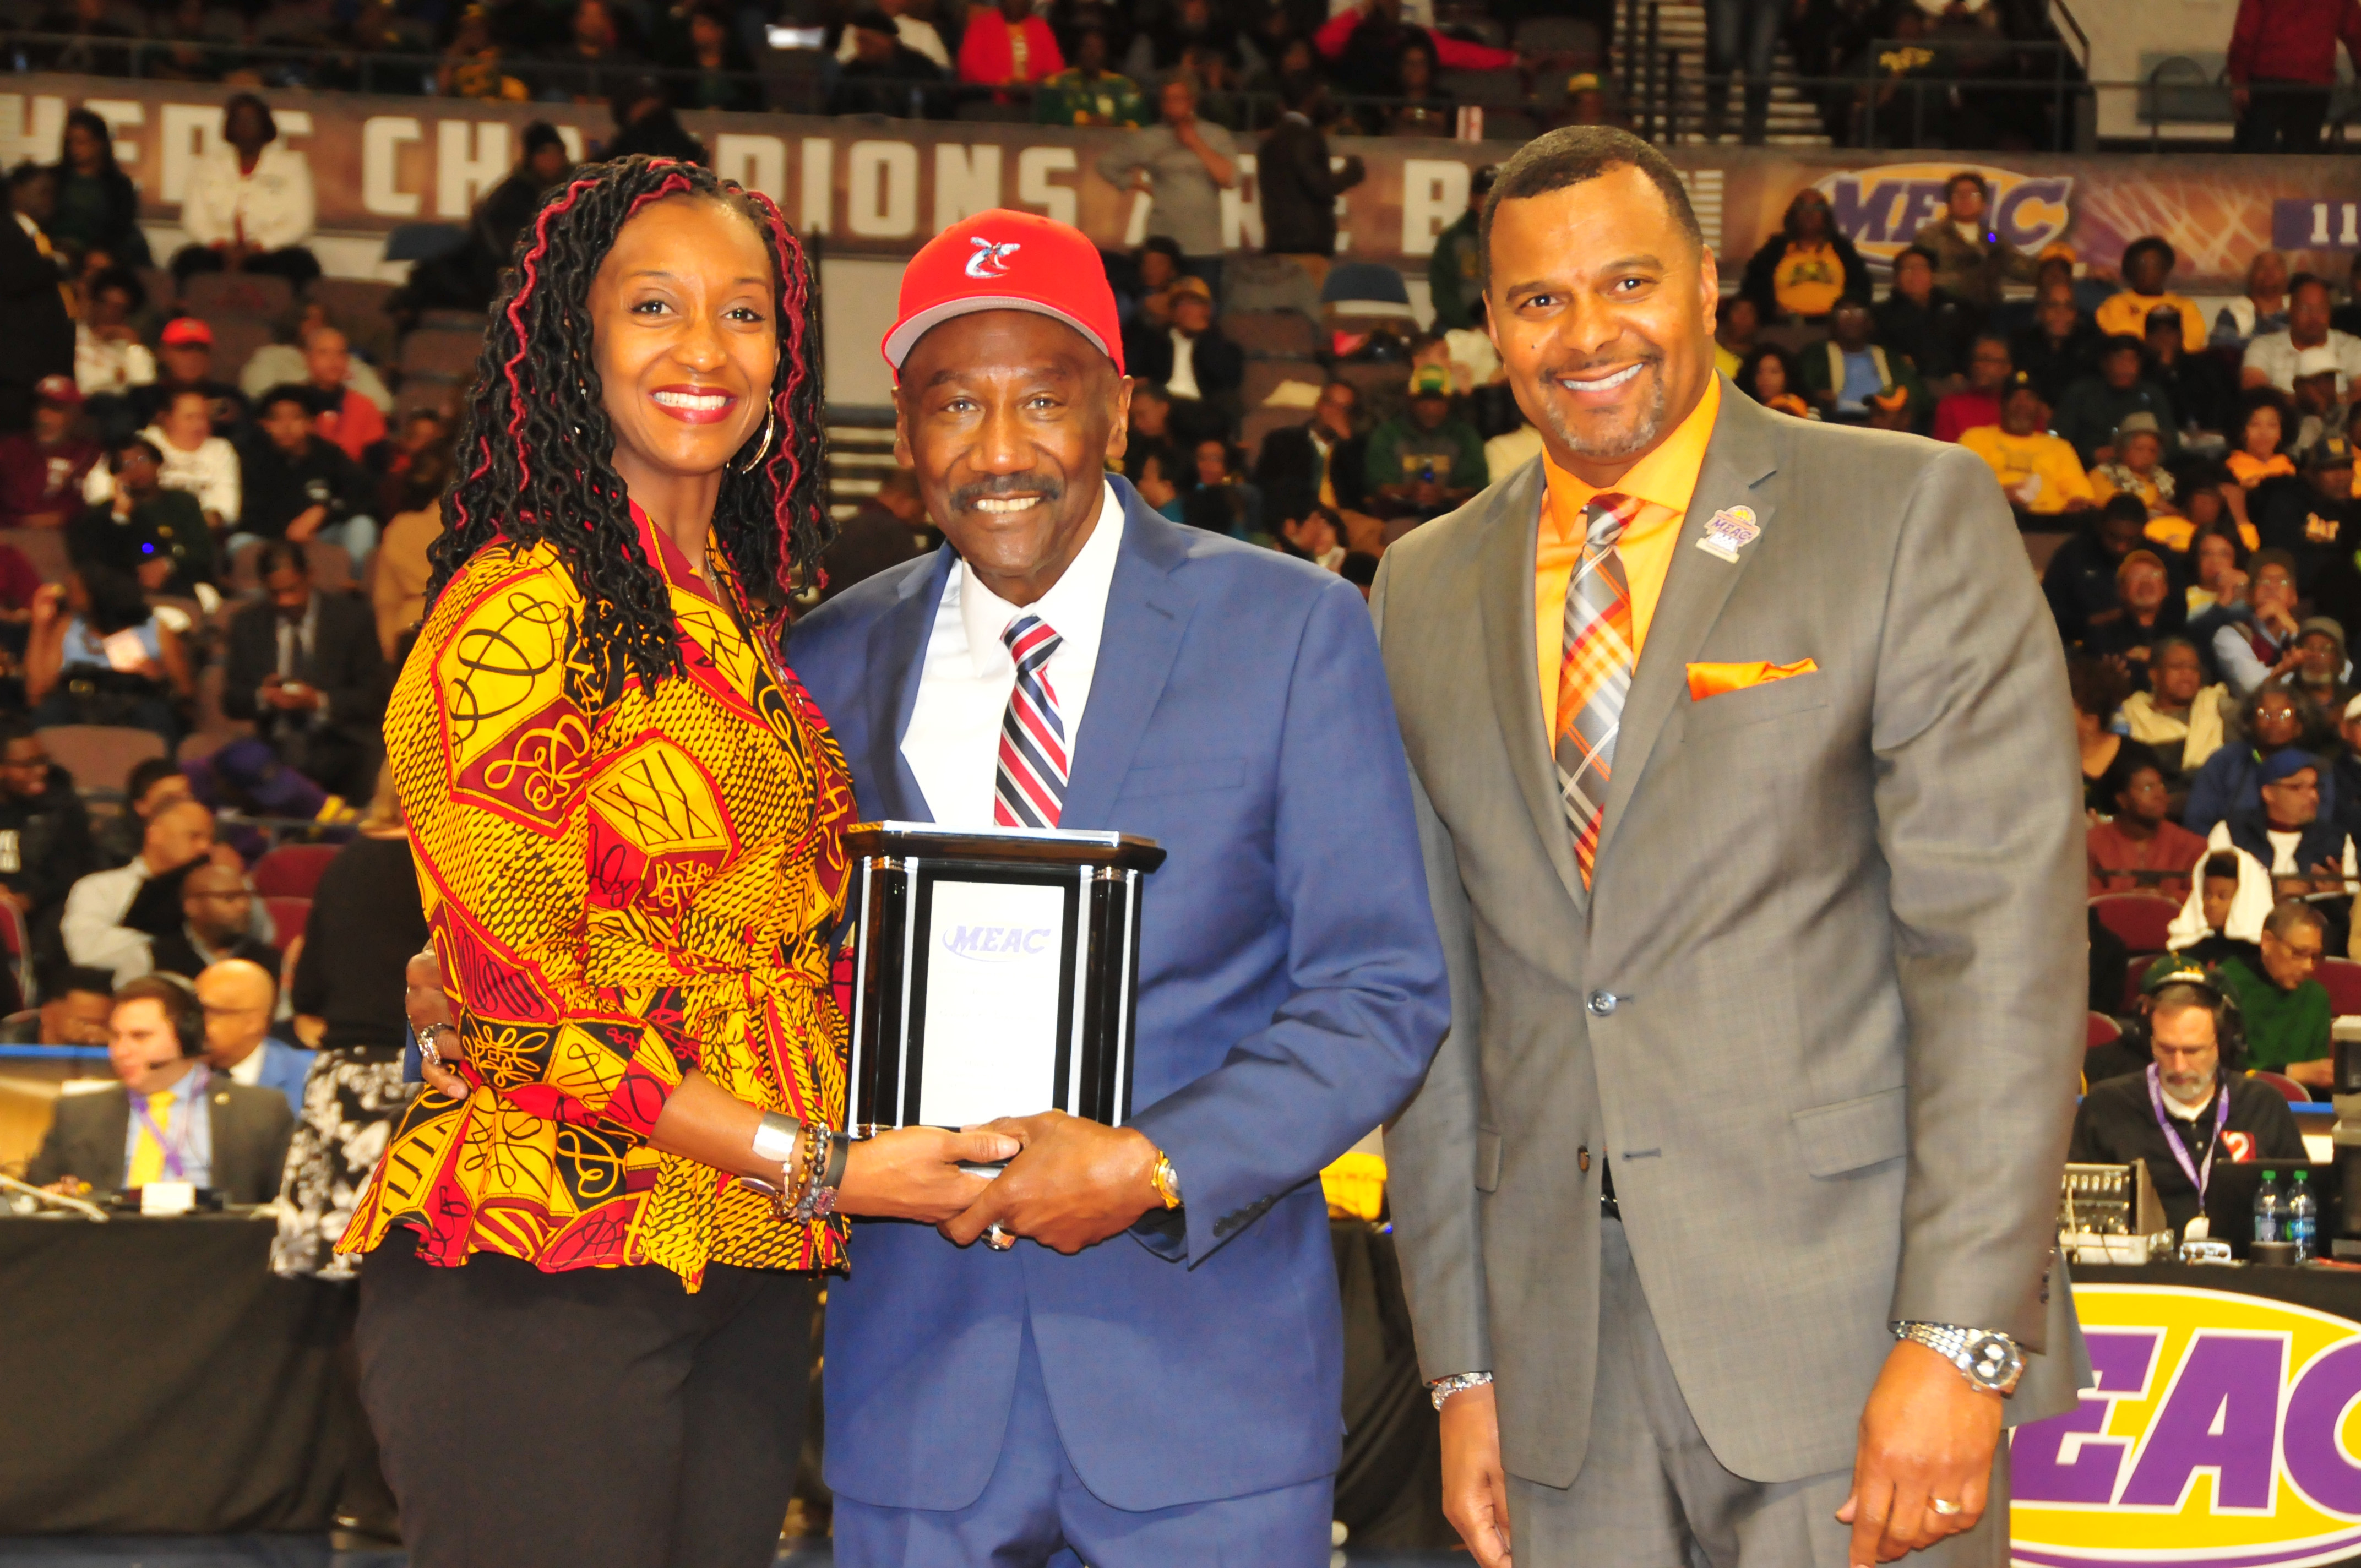 Robert P. Vanderhost (center), DSC class of 1972, was among the 2018 MEAC Alumni of the Year. He is shown March 8 at the MEAC Basketball Tourney accepting the award from two conference officials.